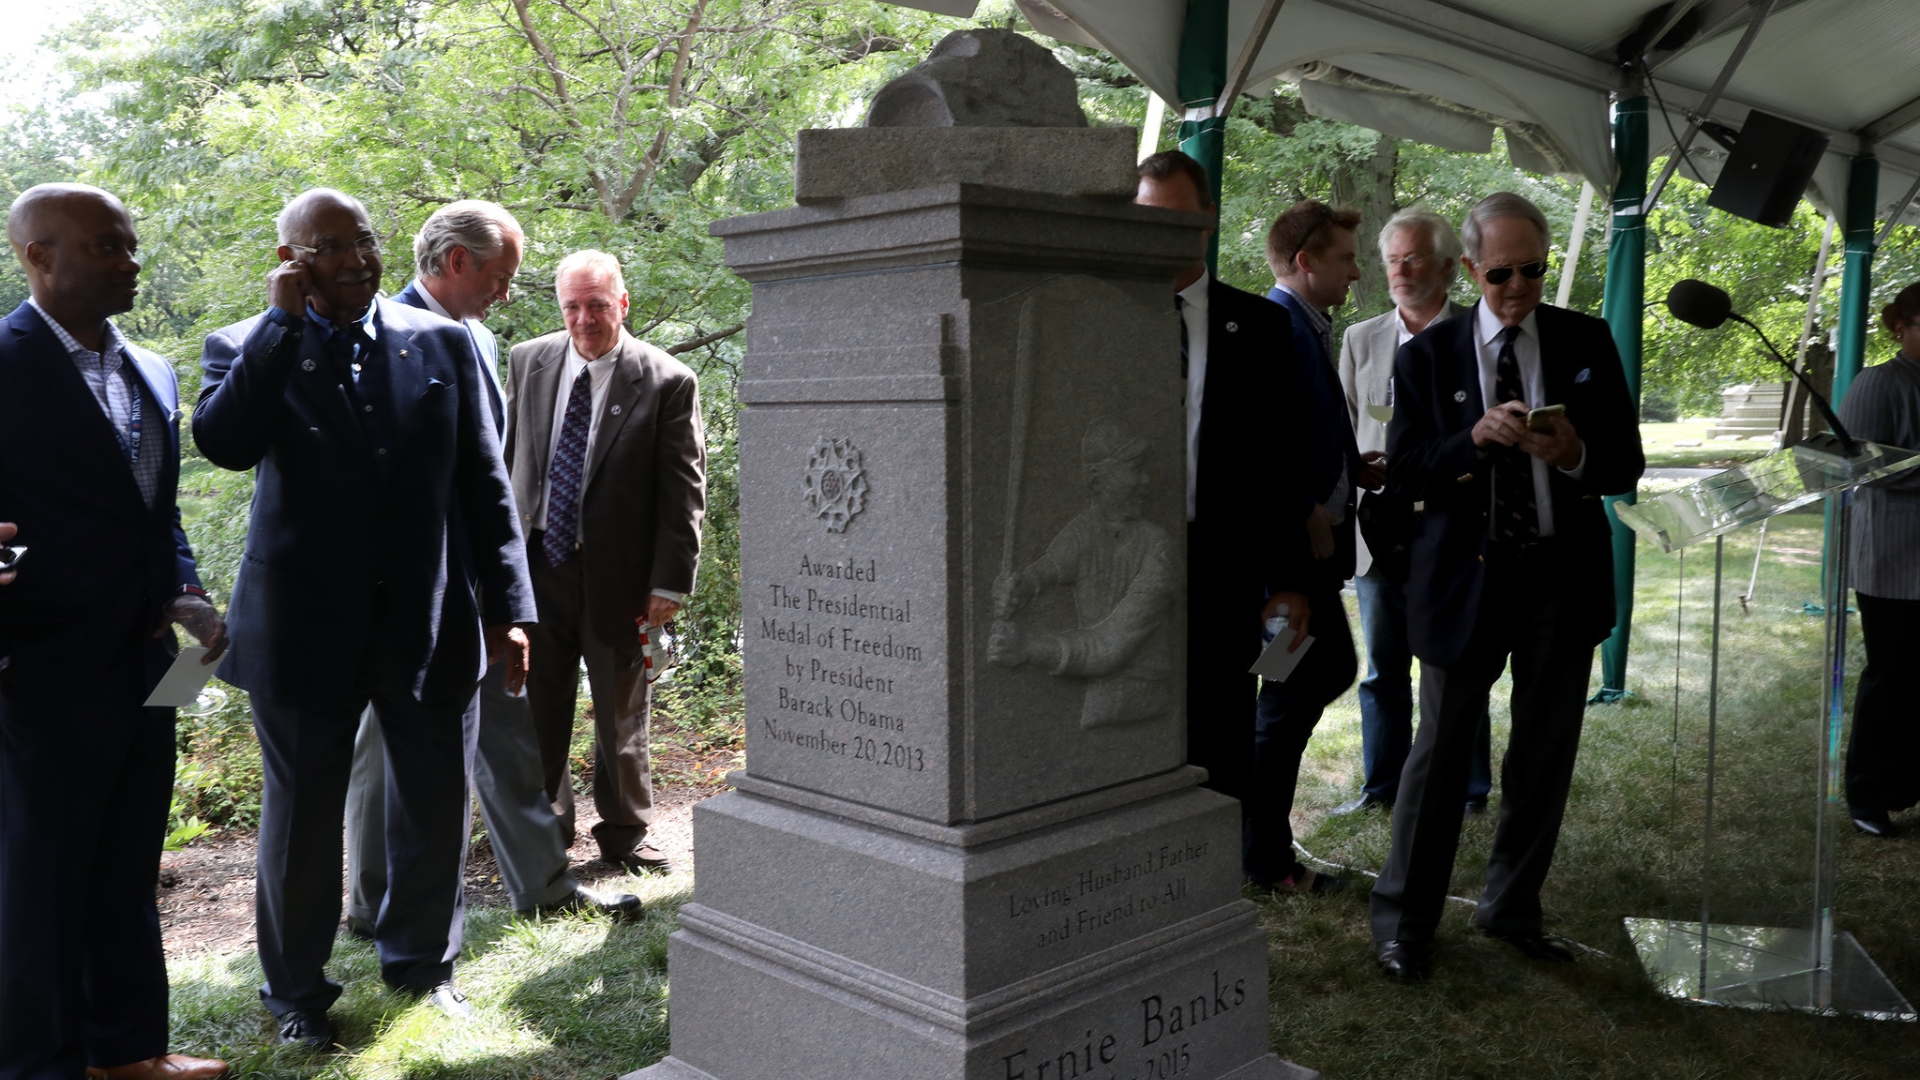 Ernie Banks Gets A New Memorial In Graceland Cemetery Within Cheering Distance Of Wrigley Field Chicago Tribune